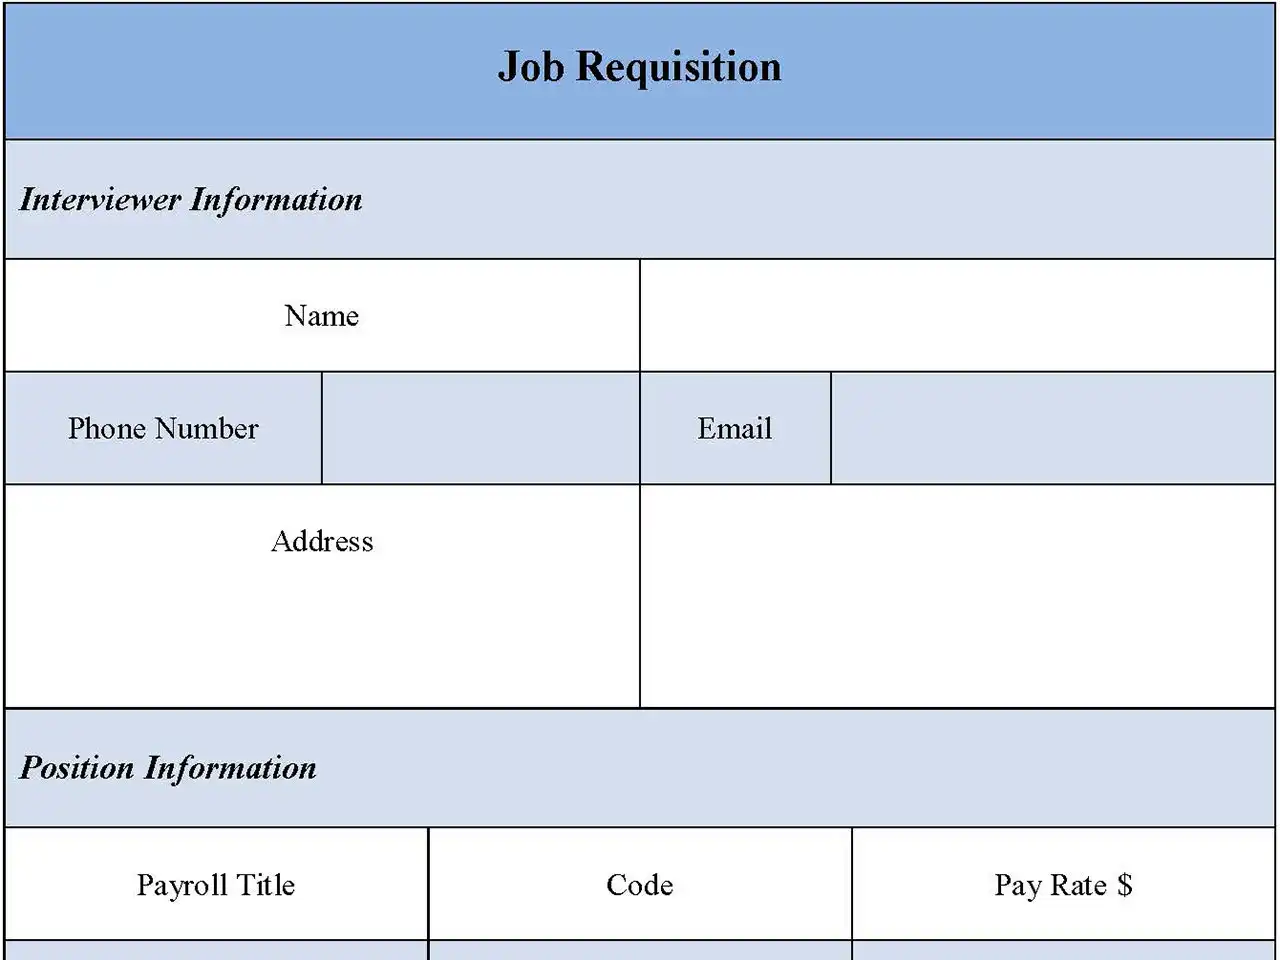 Job Requisition Fillable PDF Form And Word Document